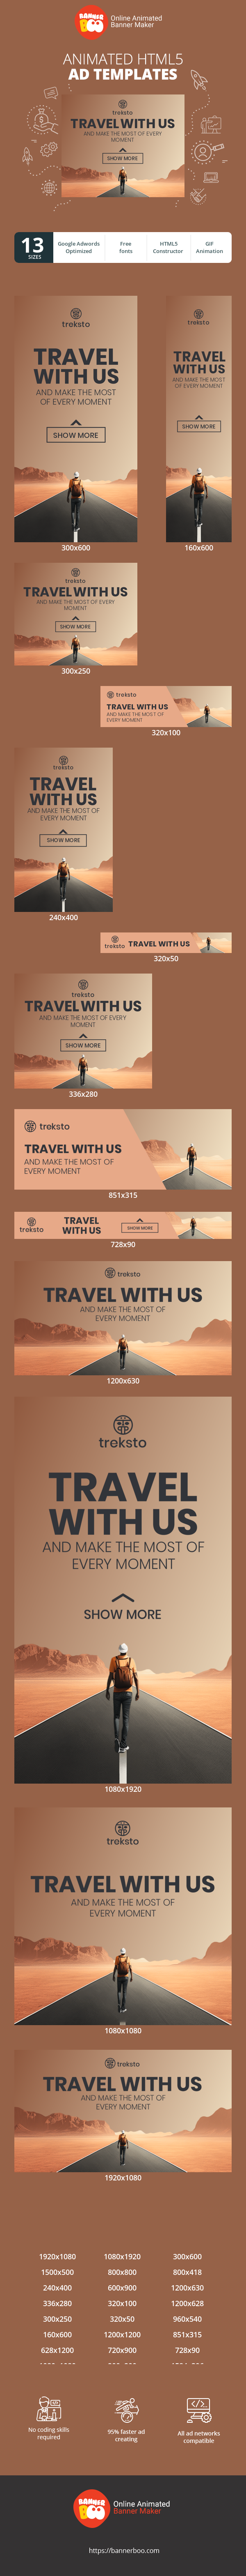 Szablon reklamy banerowej — Travel With Us — And Make The Most Of Every Moment